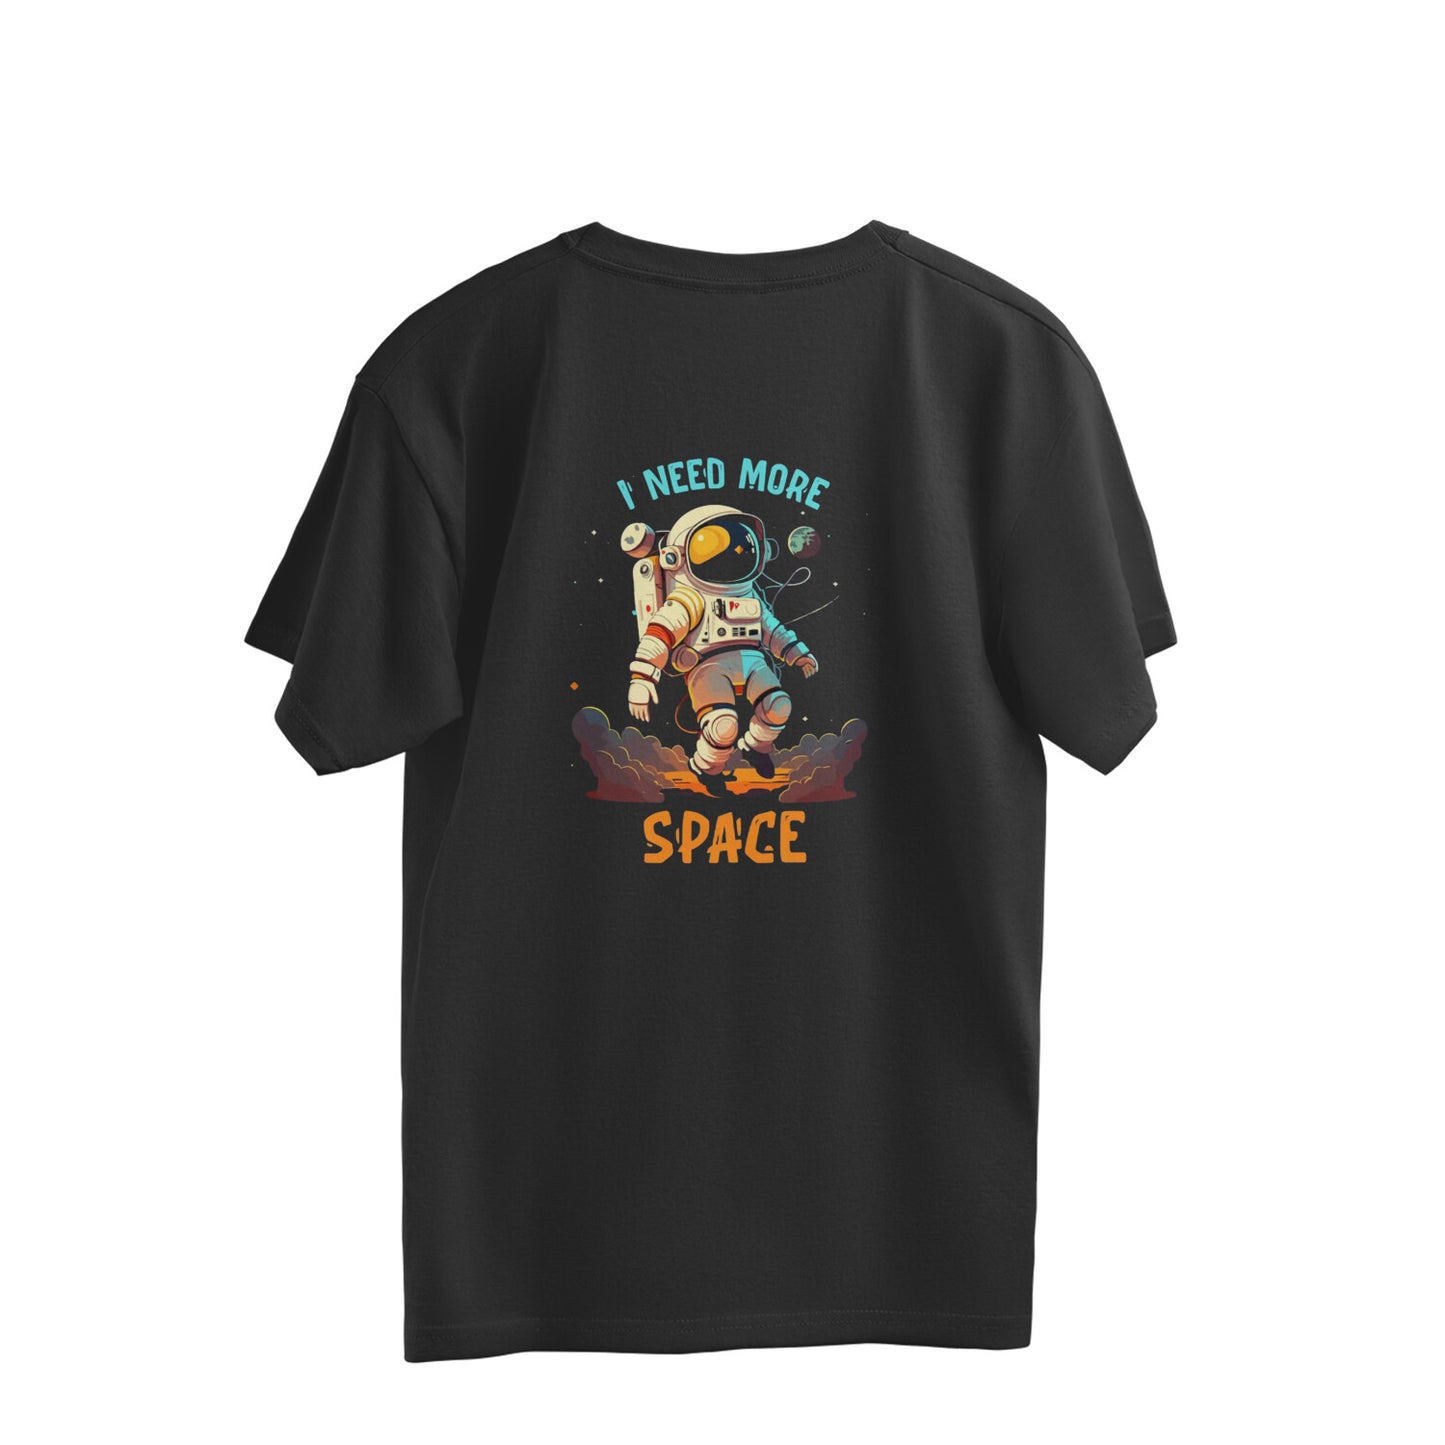 I Need More Space Over Sized T-Shirt